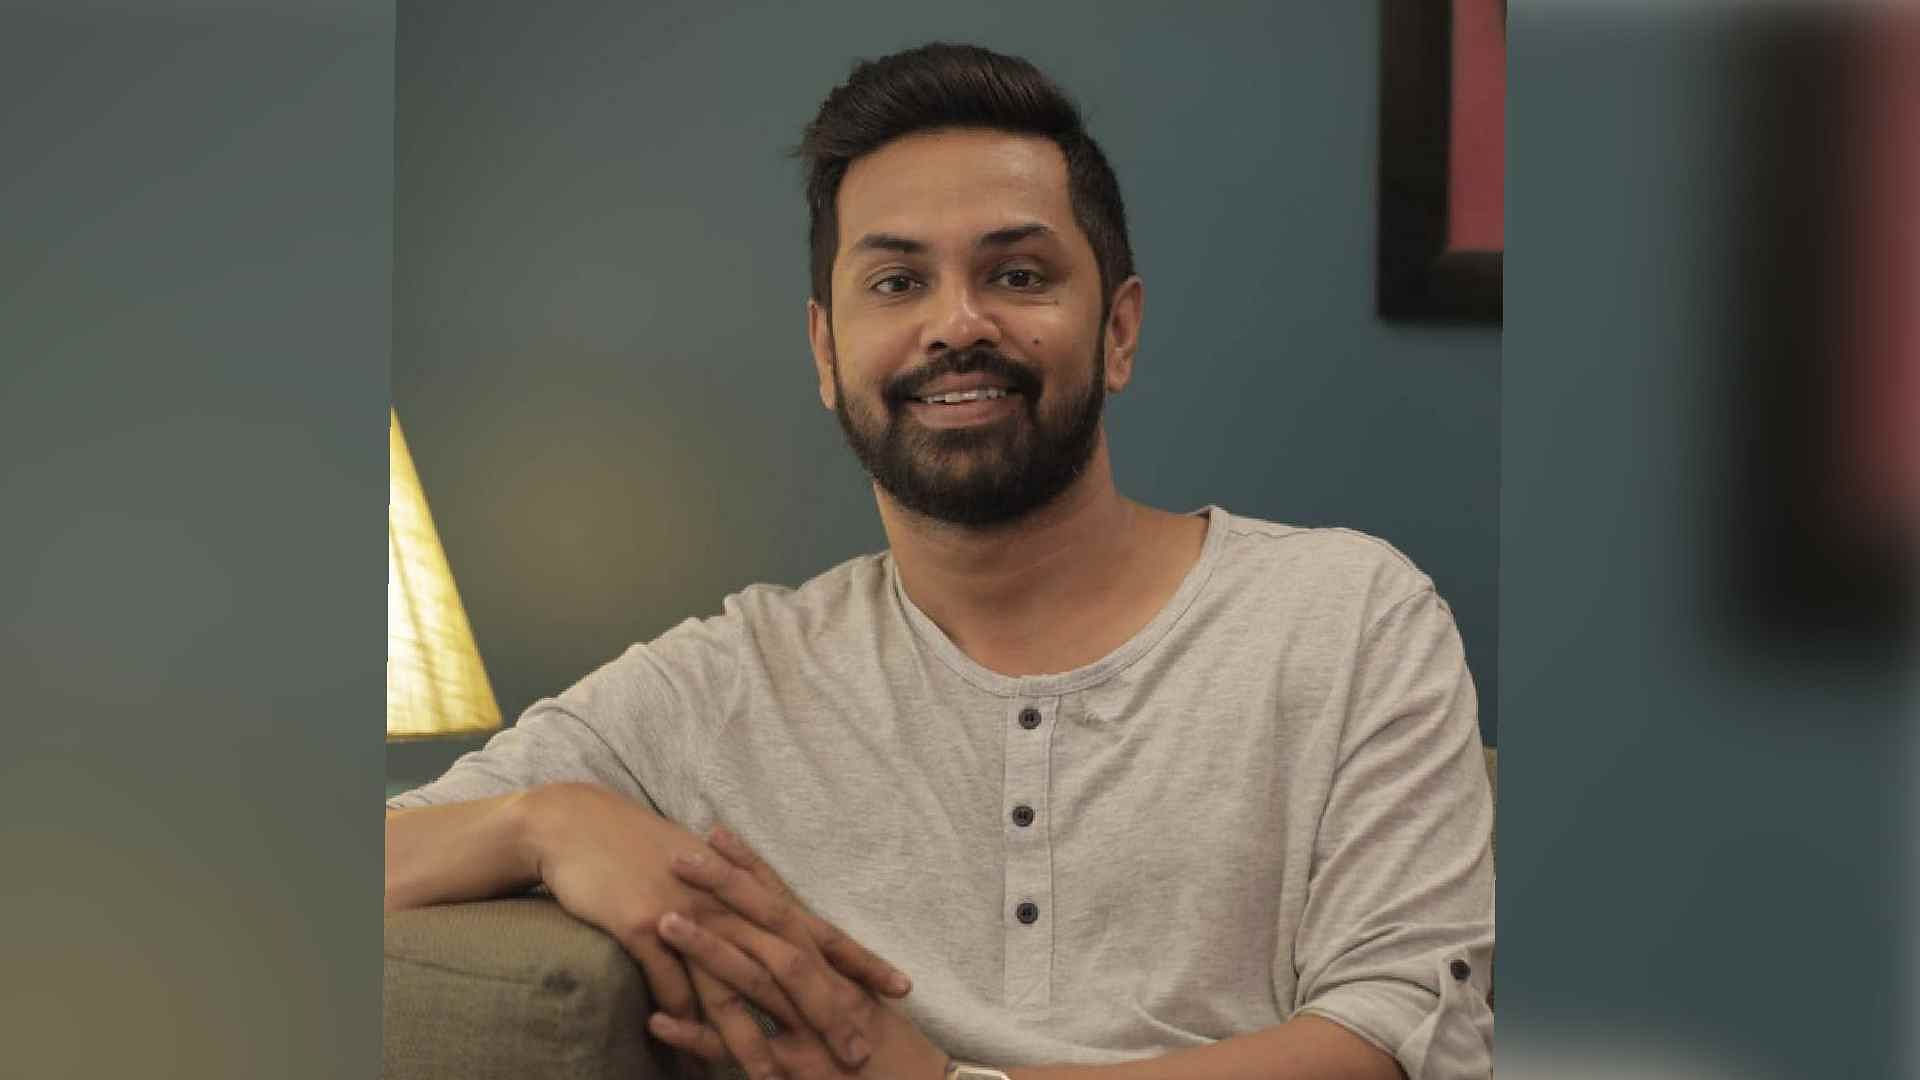 They should have a professional attitude': Ashfaque Nipun | The Daily Star